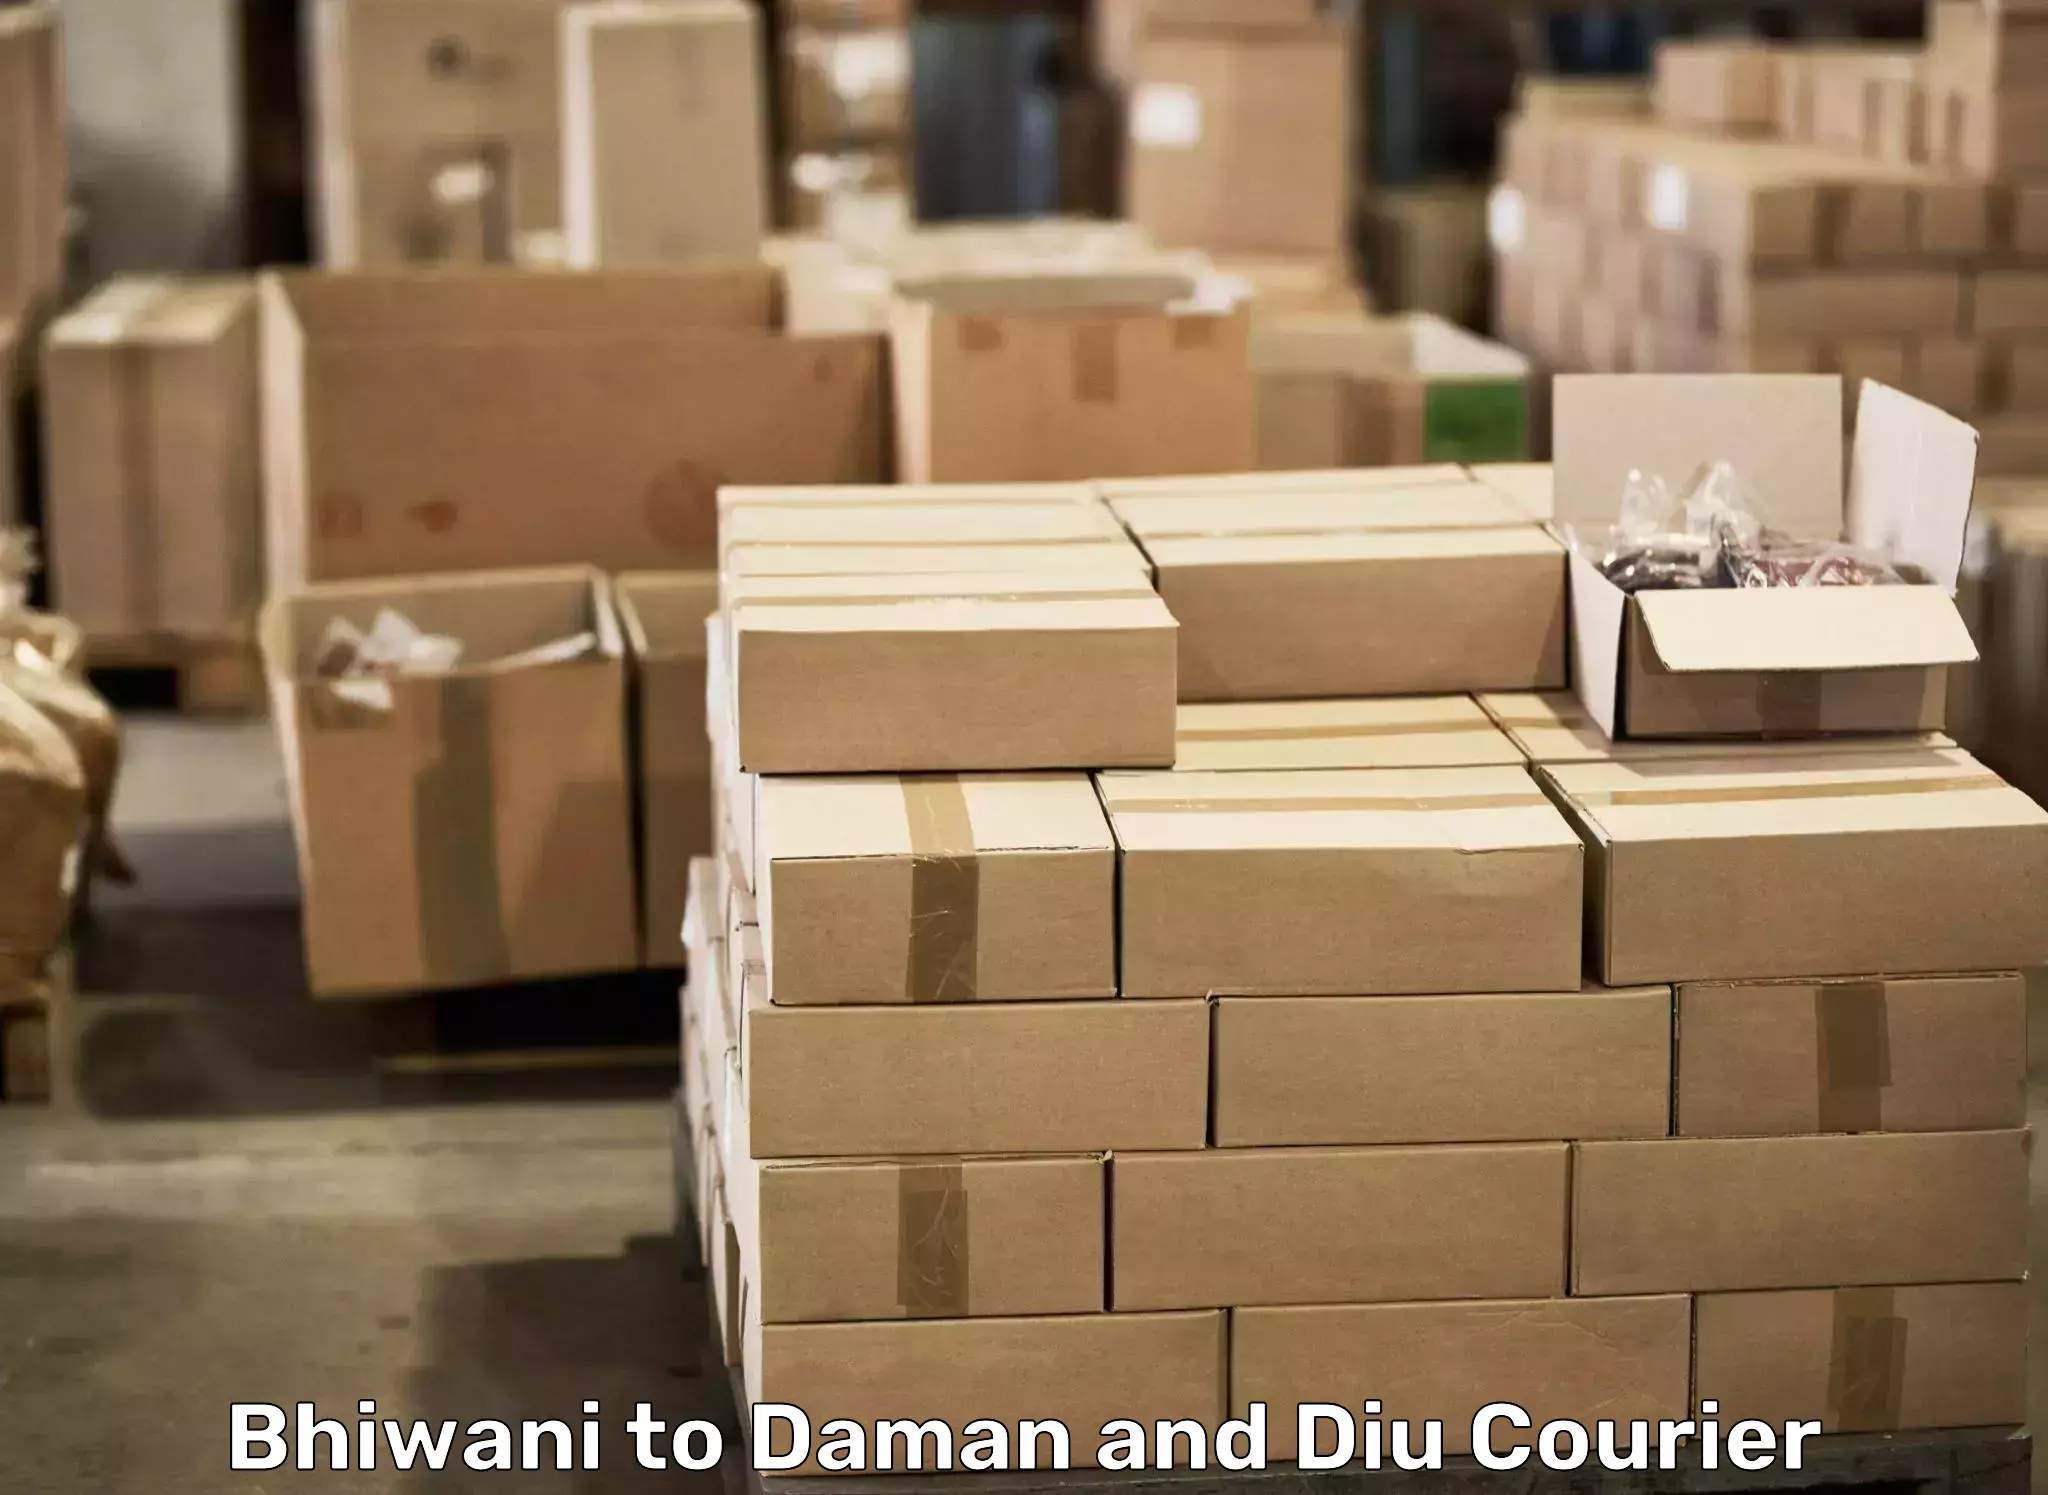 Moving and packing experts Bhiwani to Daman